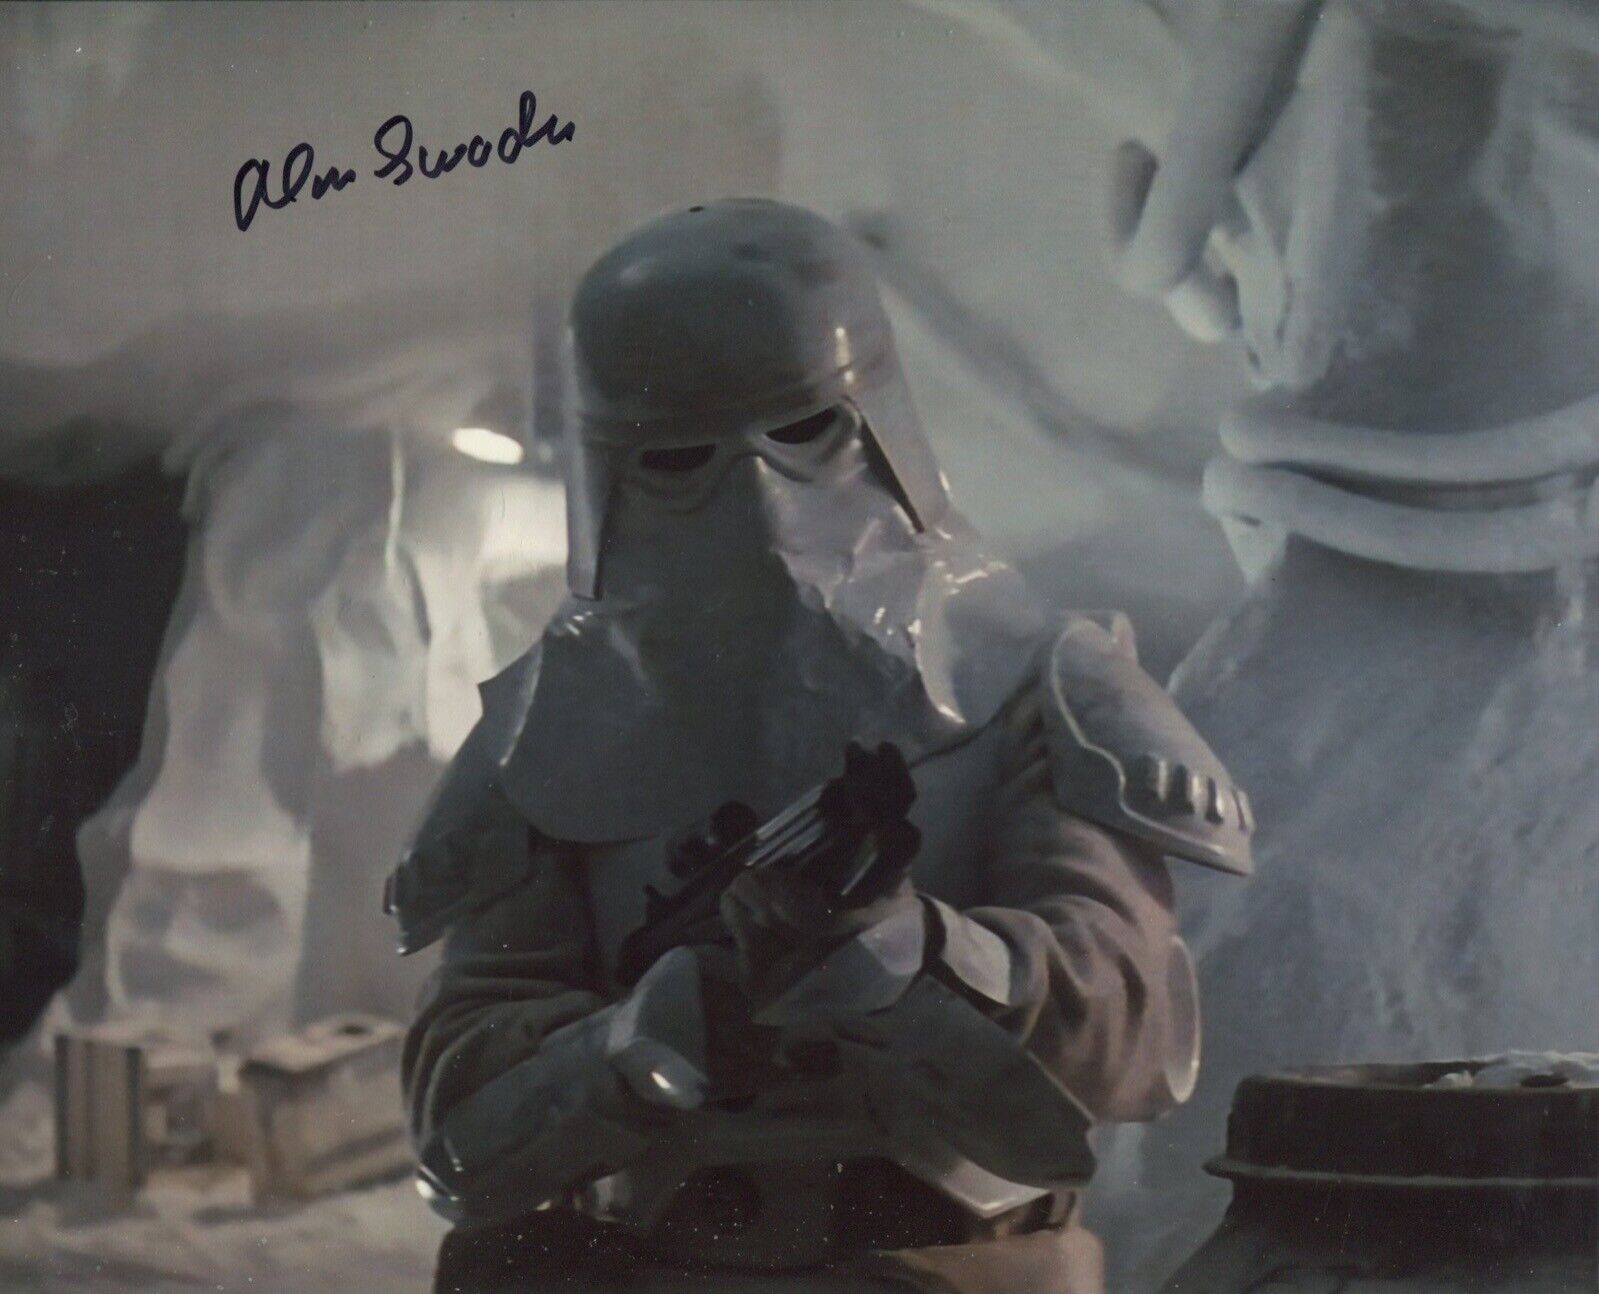 Star Wars The Empire Strikes Back 8x10 photo signed by actor Alan Swaden. Good condition. All